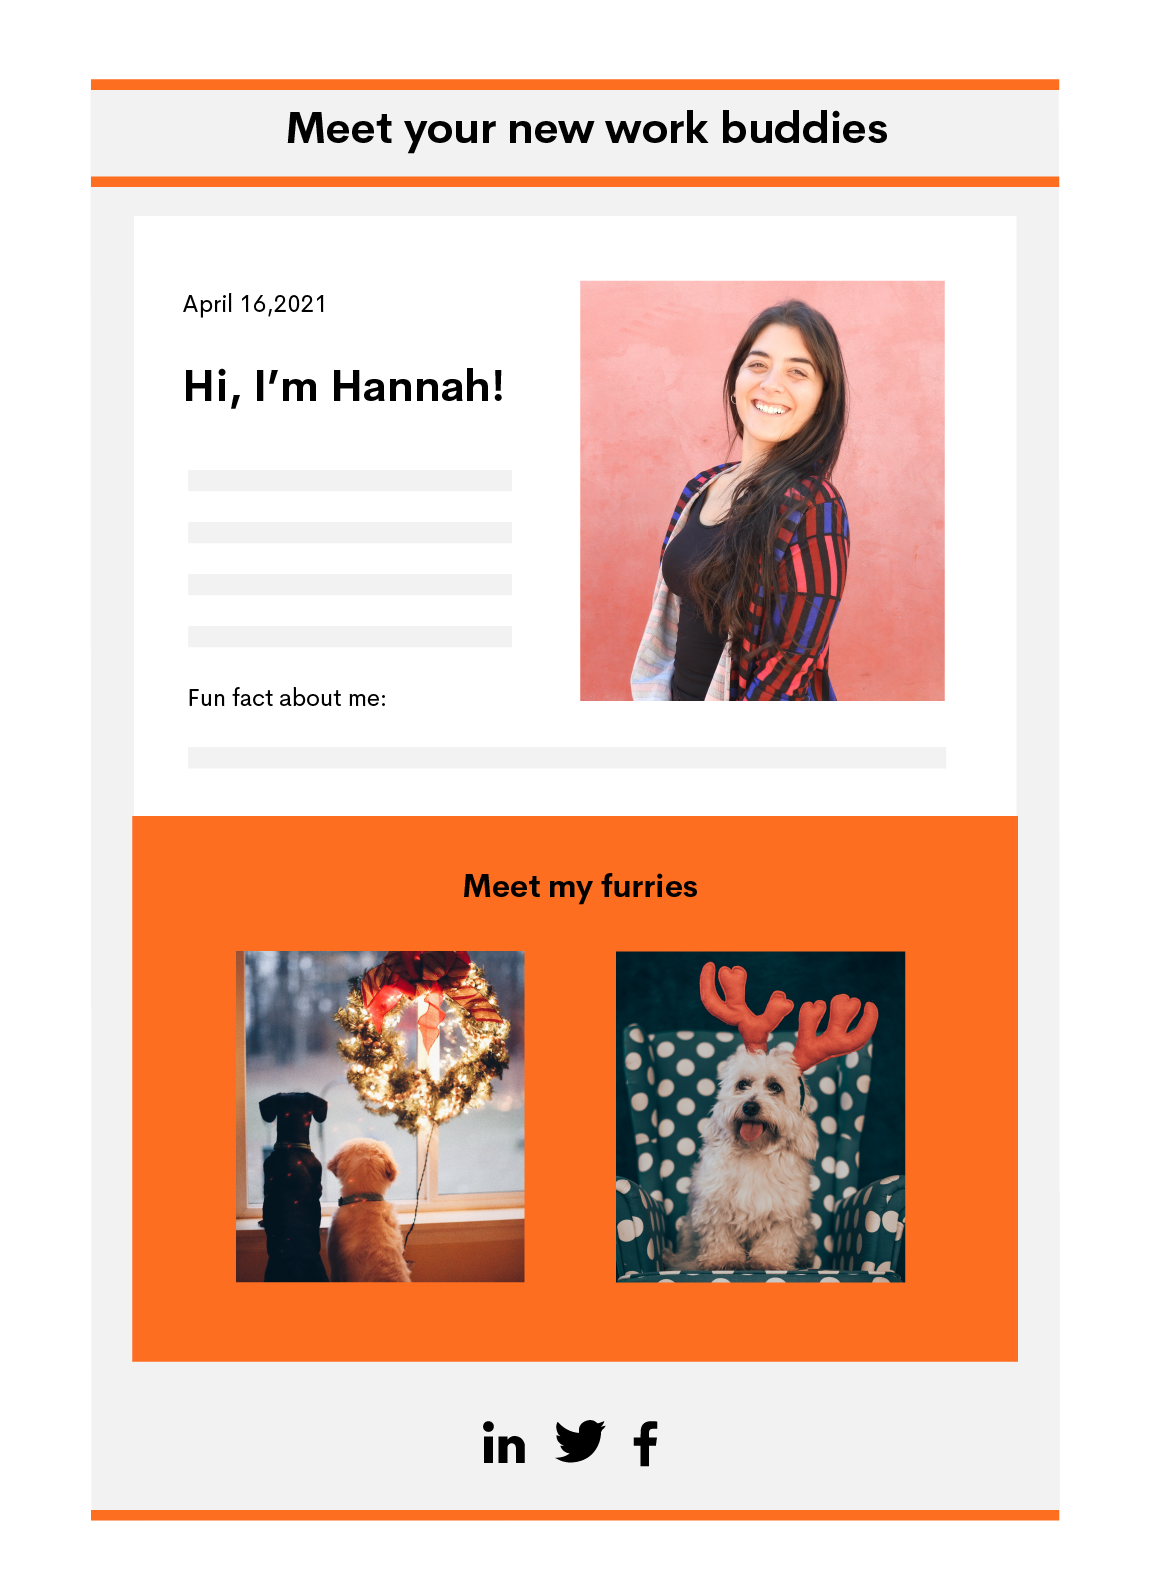 Newsletter with the header "Meet your new work buddies," followed by an image of a smiling young woman next to the headline "Hi, I'm Hannah!", and under that, the headline "Meet my furries" followed by images of three dogs. 